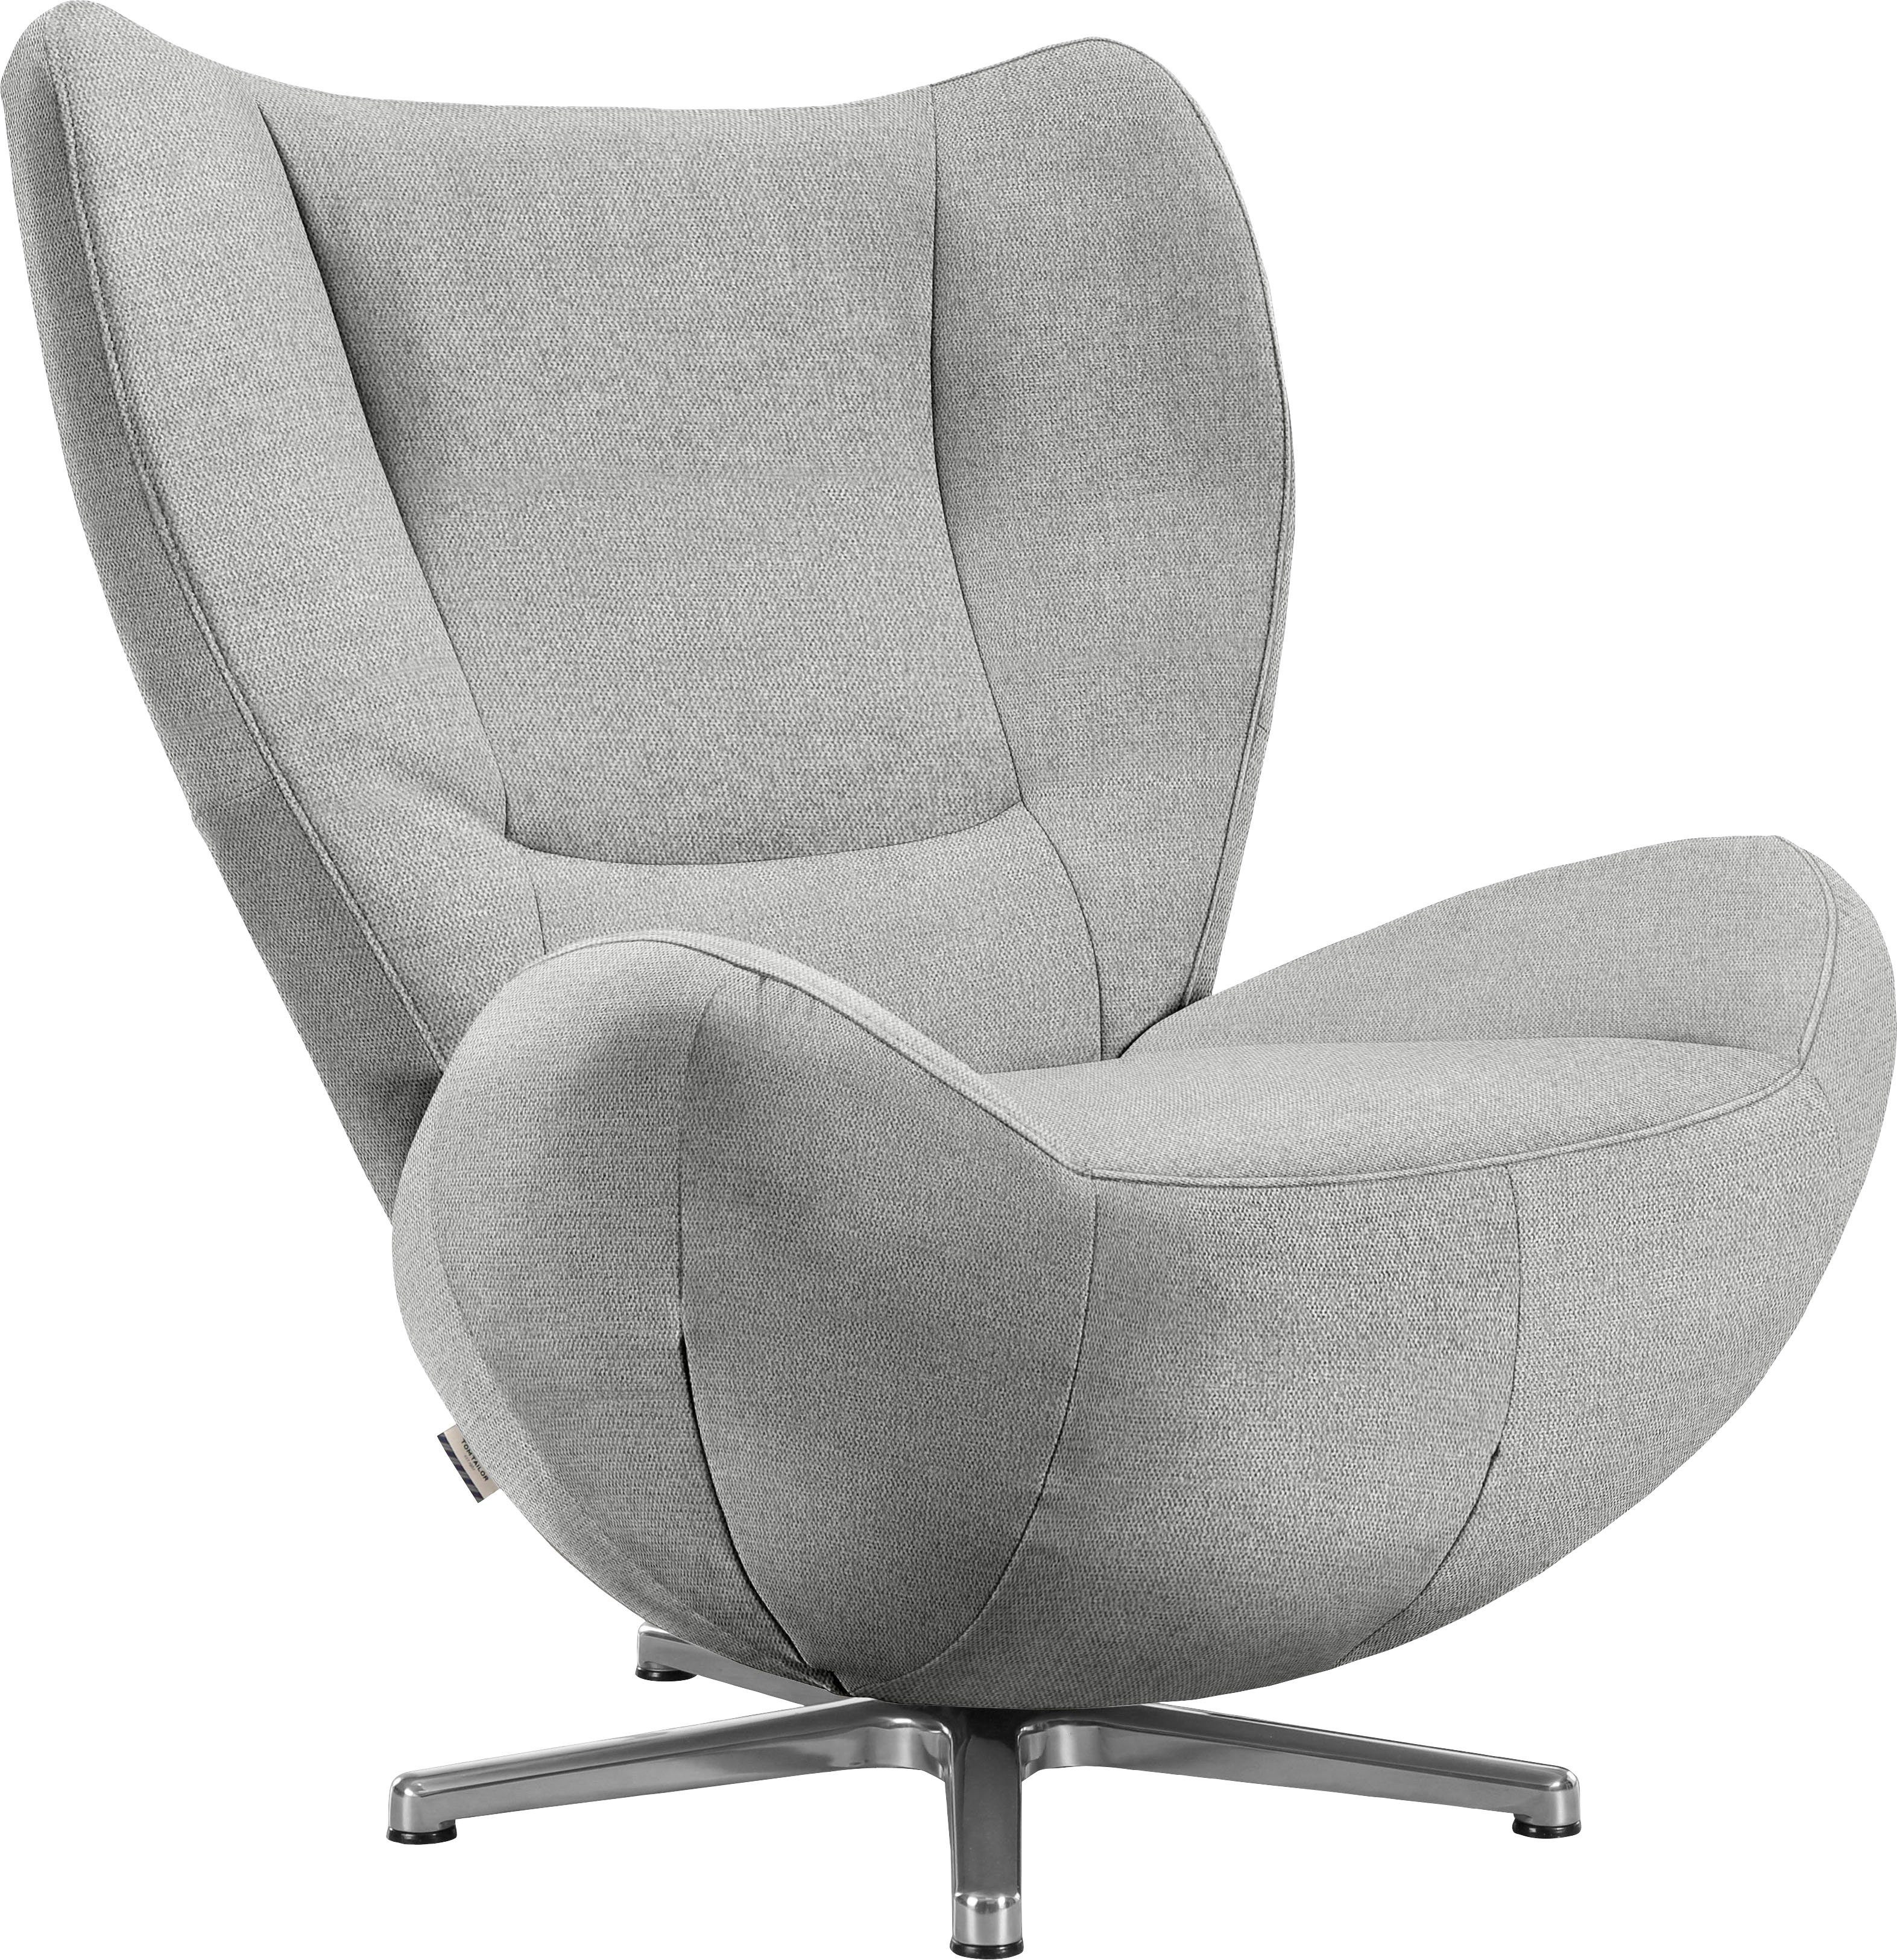 TOM TOM in Loungesessel Metall-Drehfuß PURE, HOME Chrom TAILOR mit